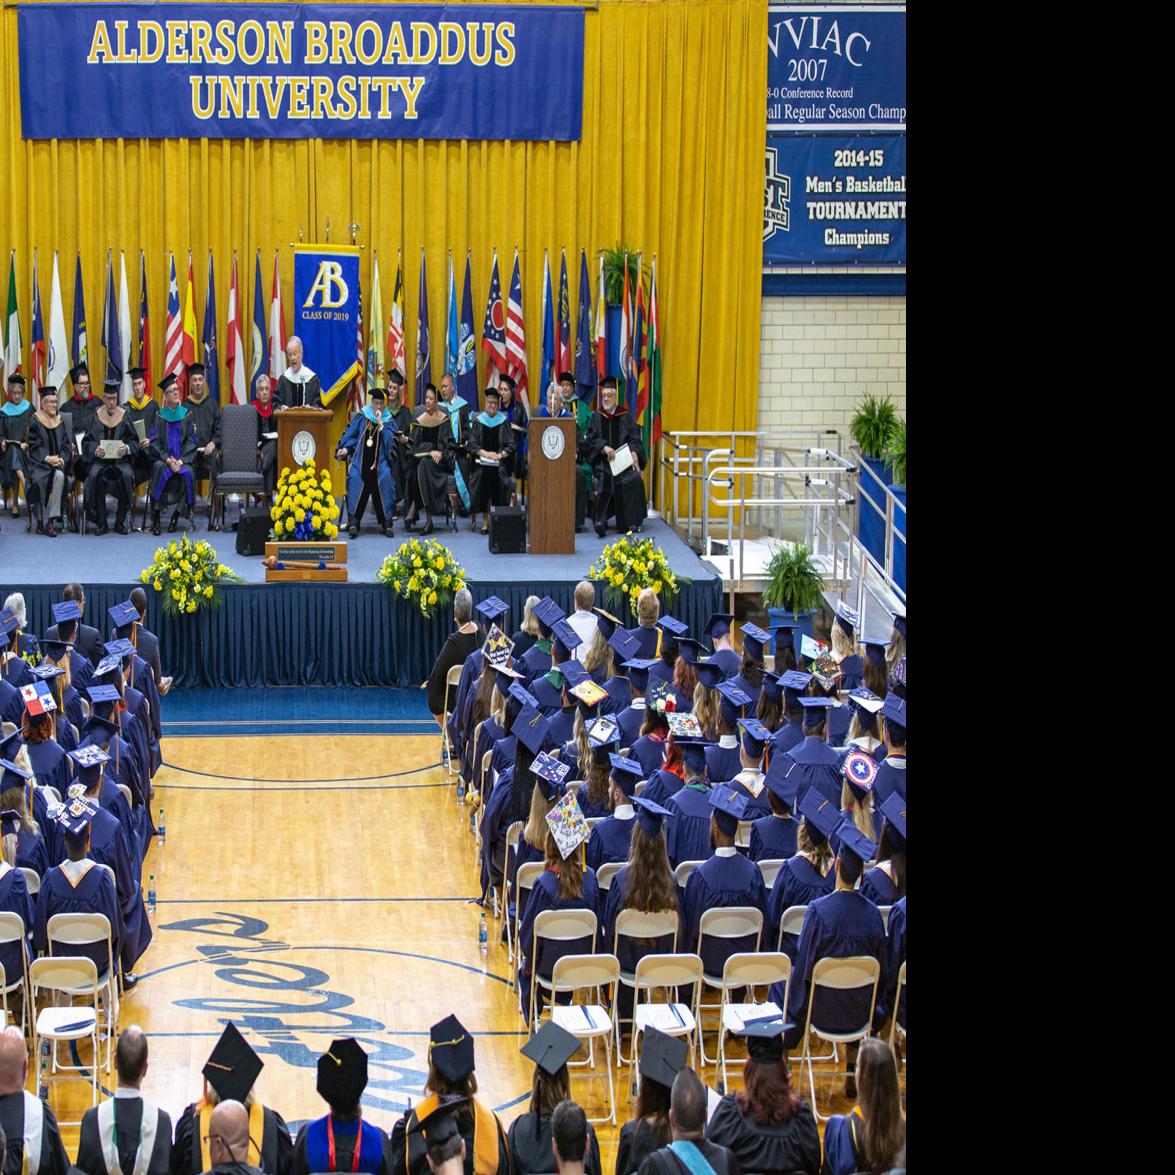 Alderson Broaddus University: Students' lives thrown into disarray after  West Virginia college announces plans to close